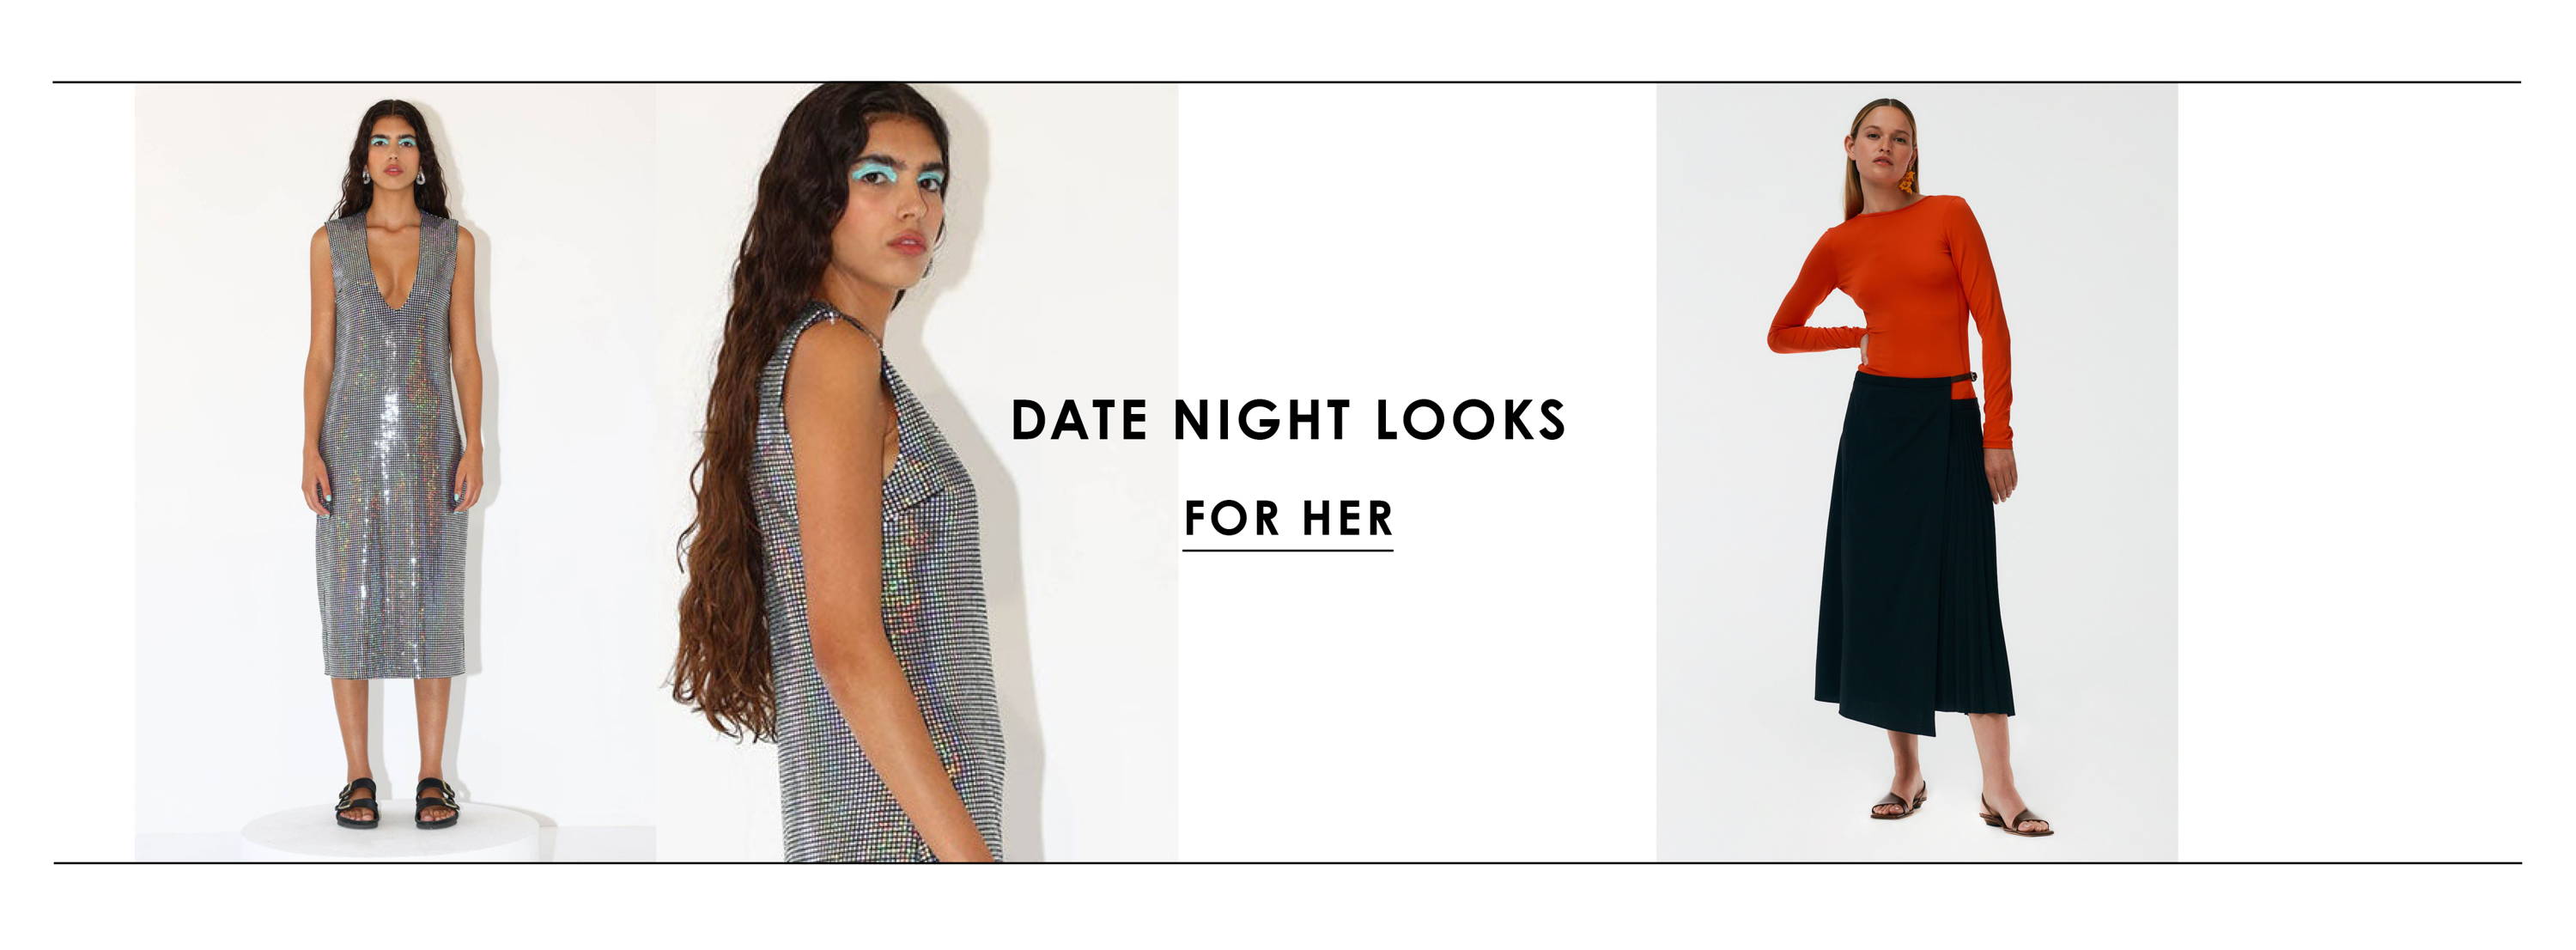 Date Night Looks for Her